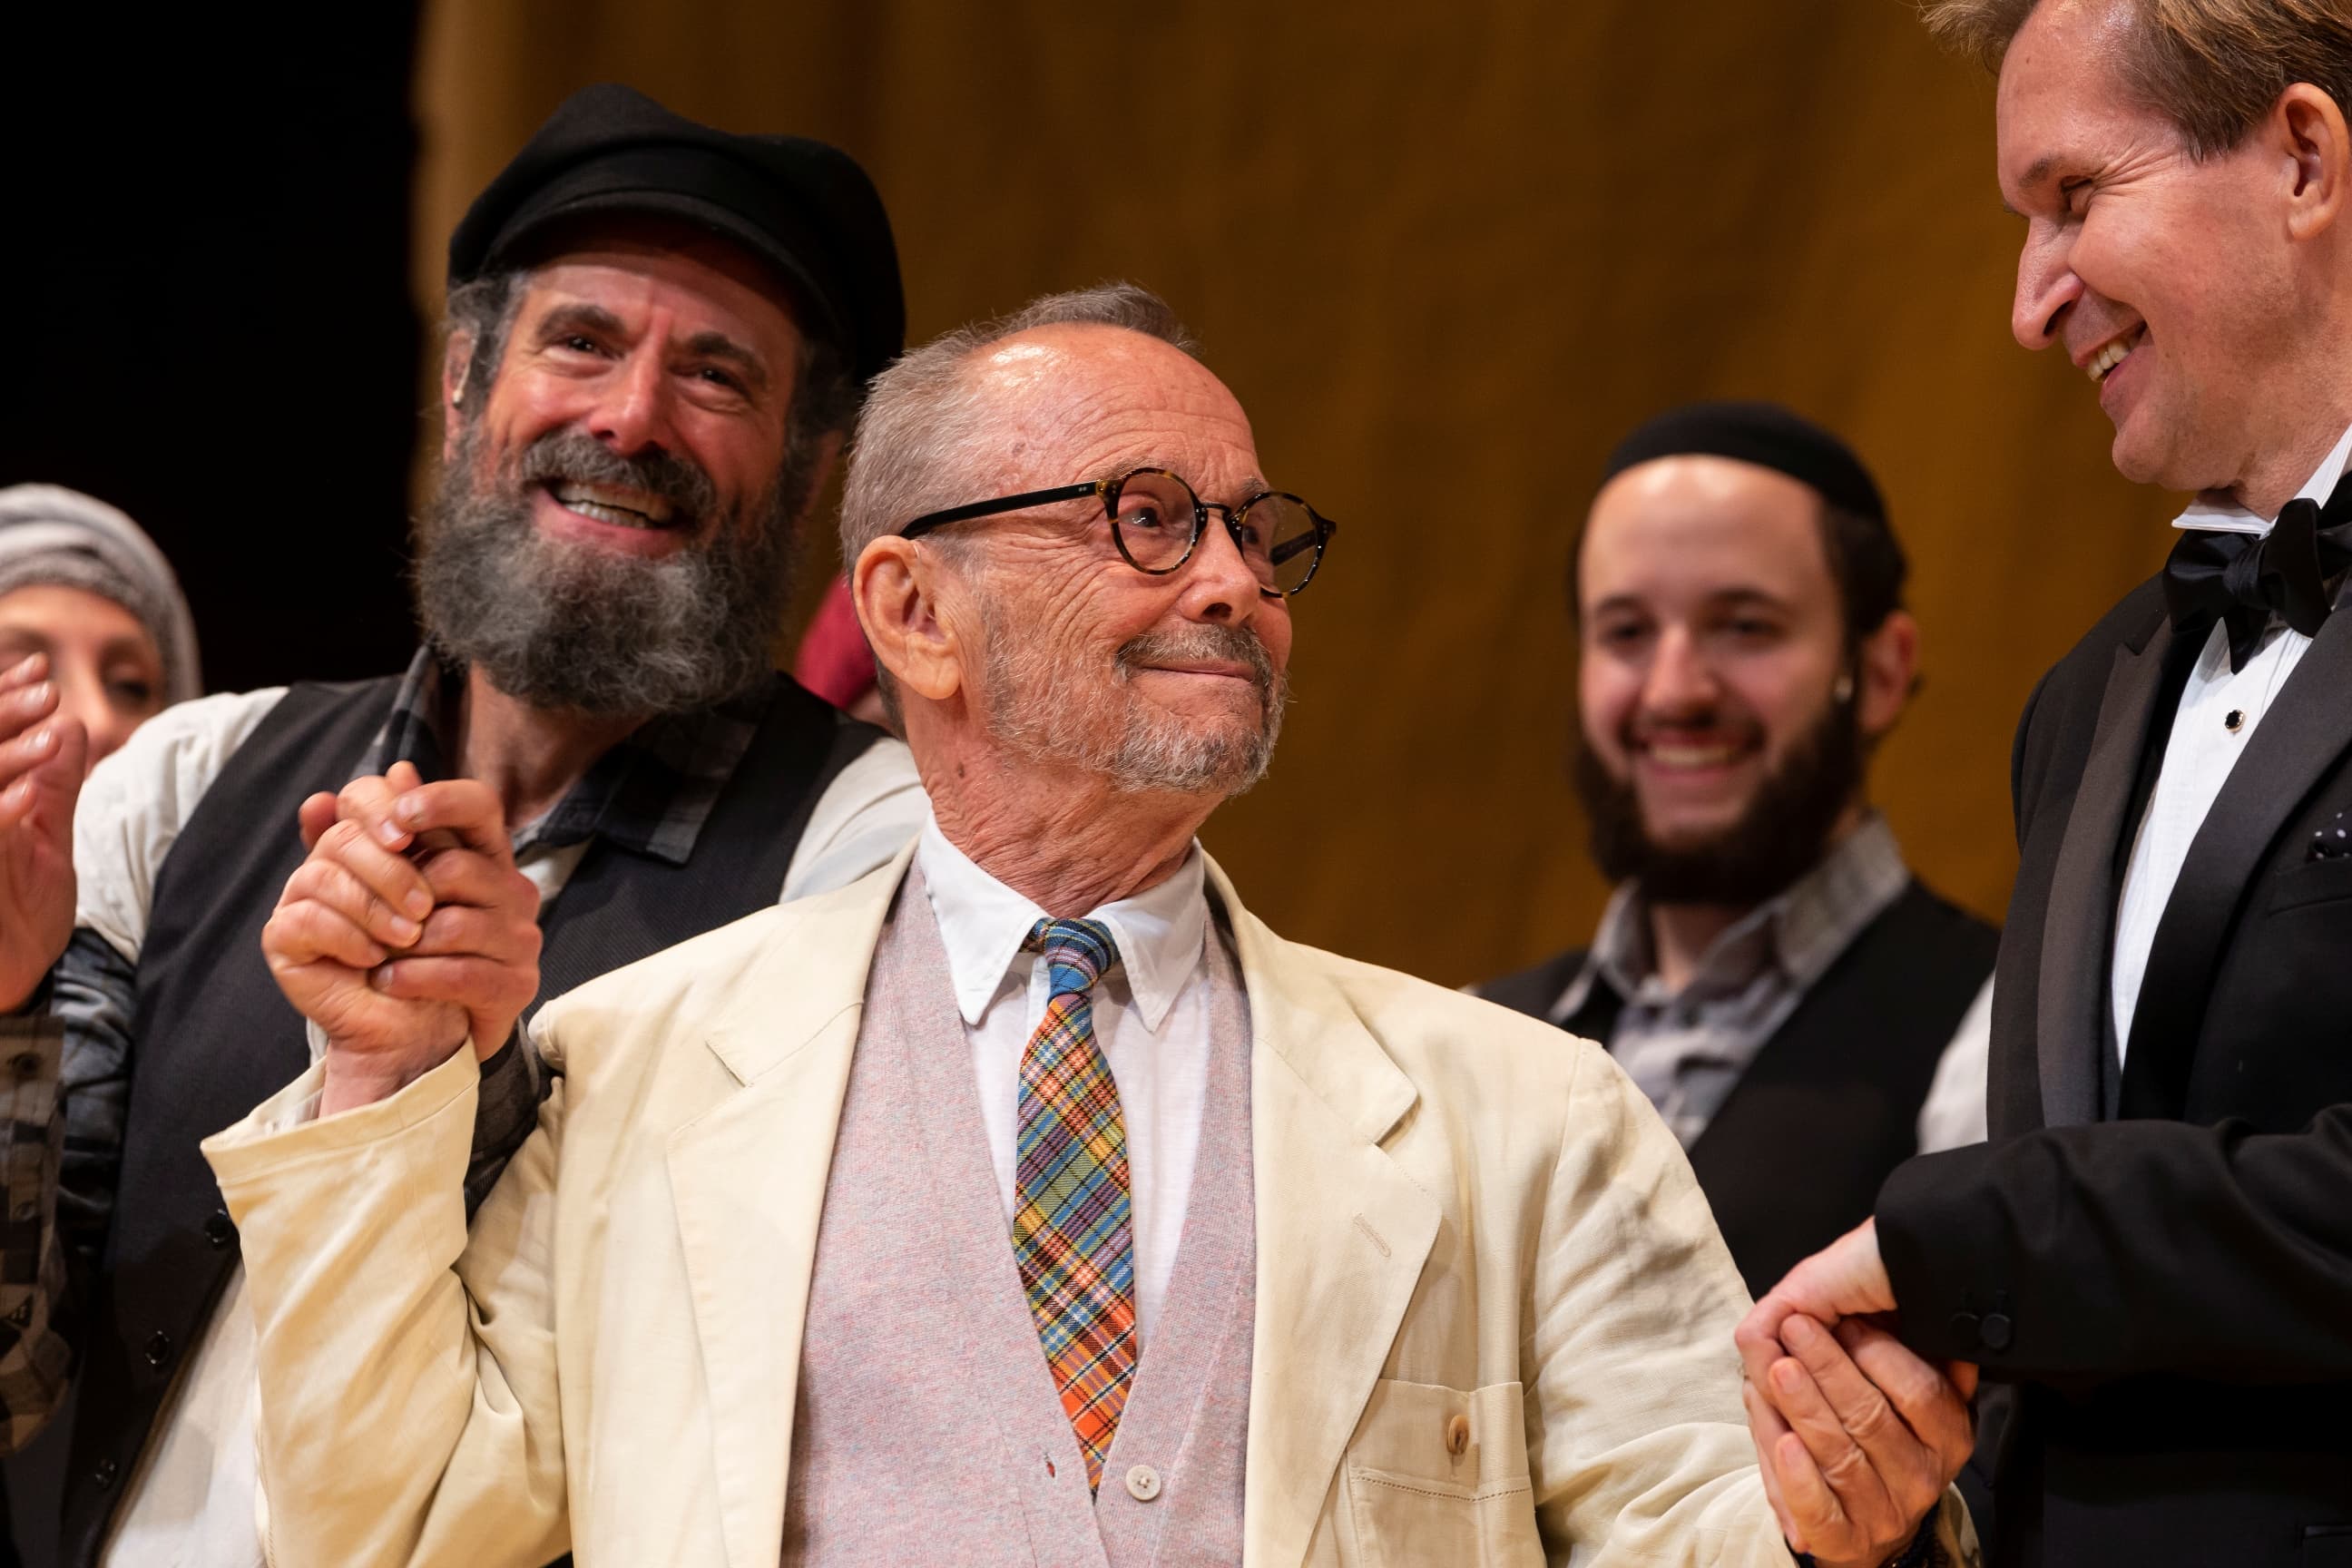 Joel Grey with members of the cast and team on opening night of Fiddler on the Roof. Photo Courtesy of the Production.